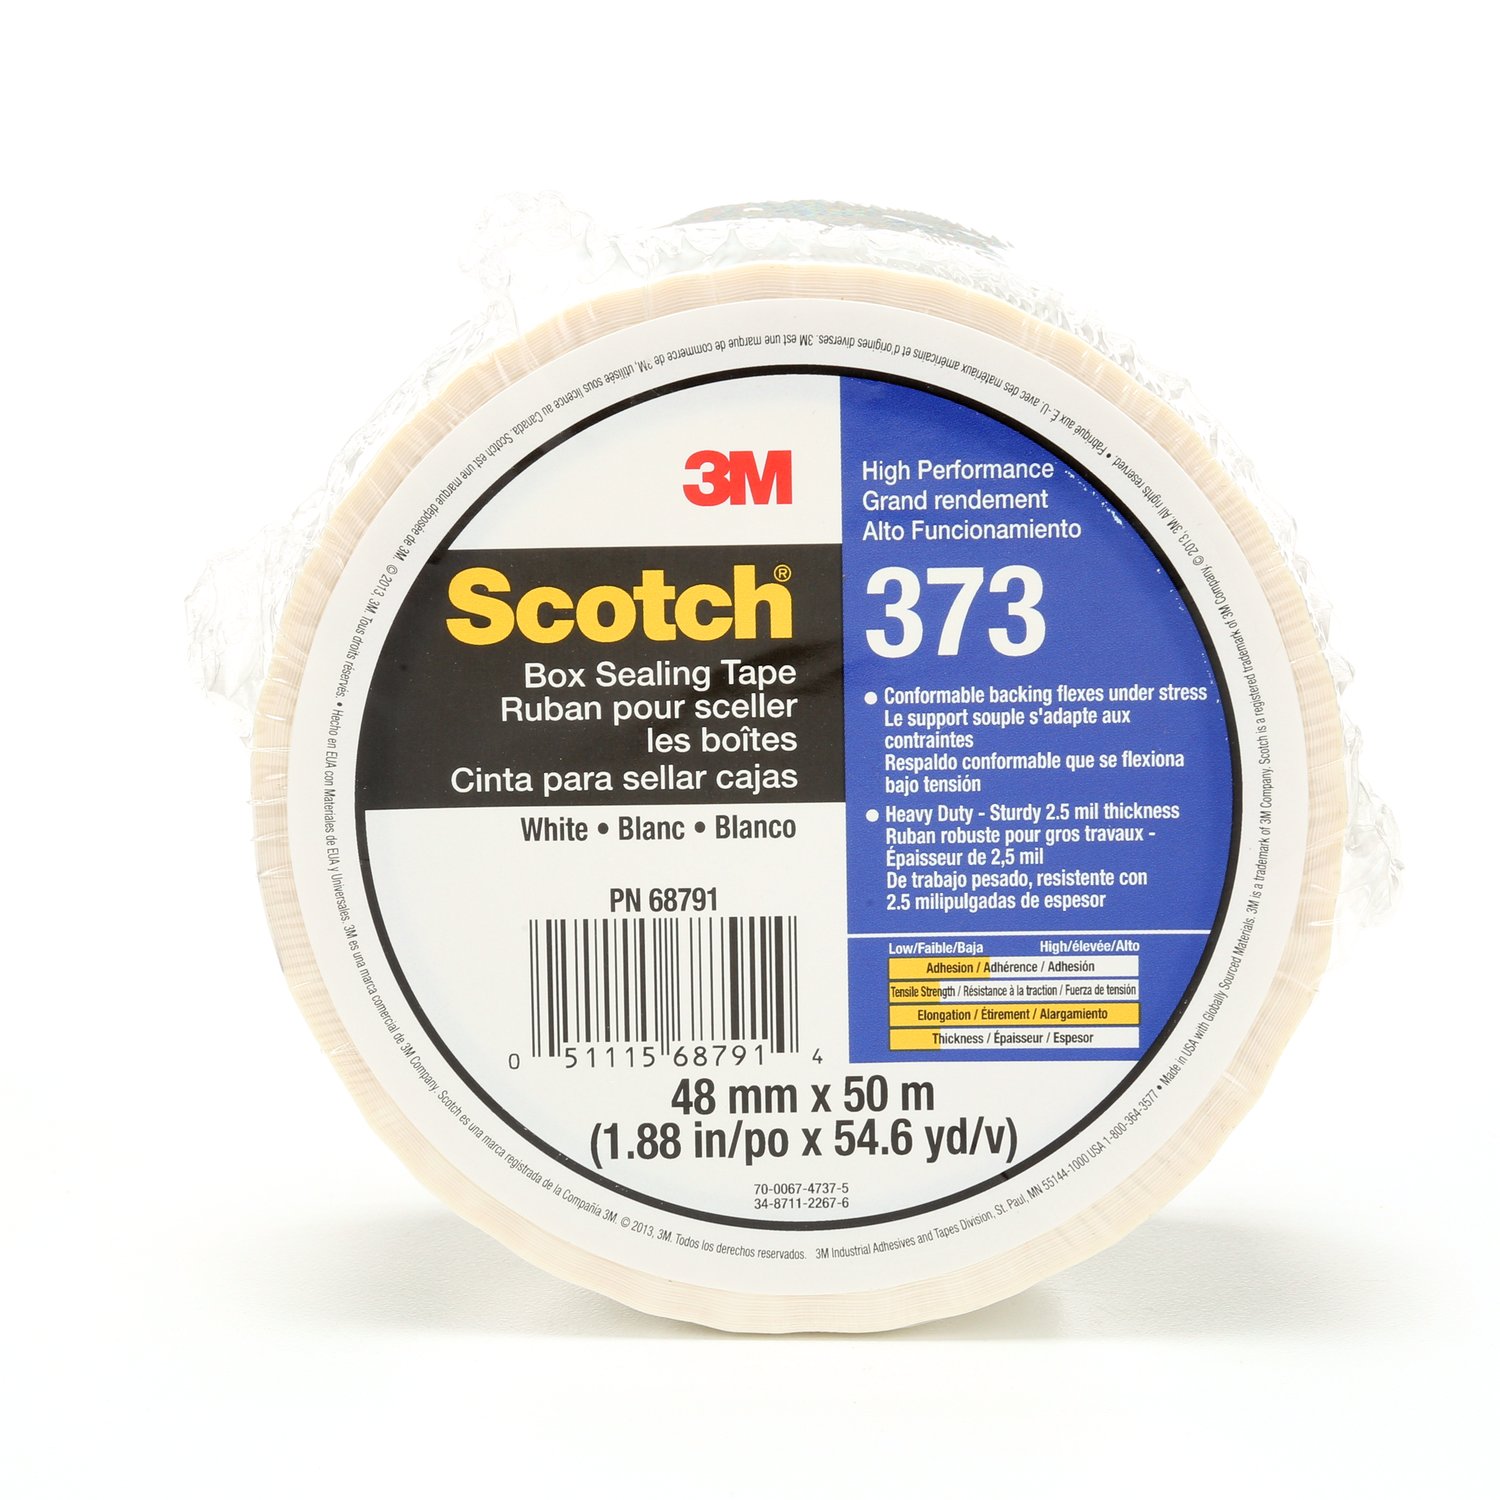 7010374968 - Scotch Box Sealing Tape 373, White, 48 mm x 50 m, 36/Case, Individually
Wrapped Conveniently Packaged